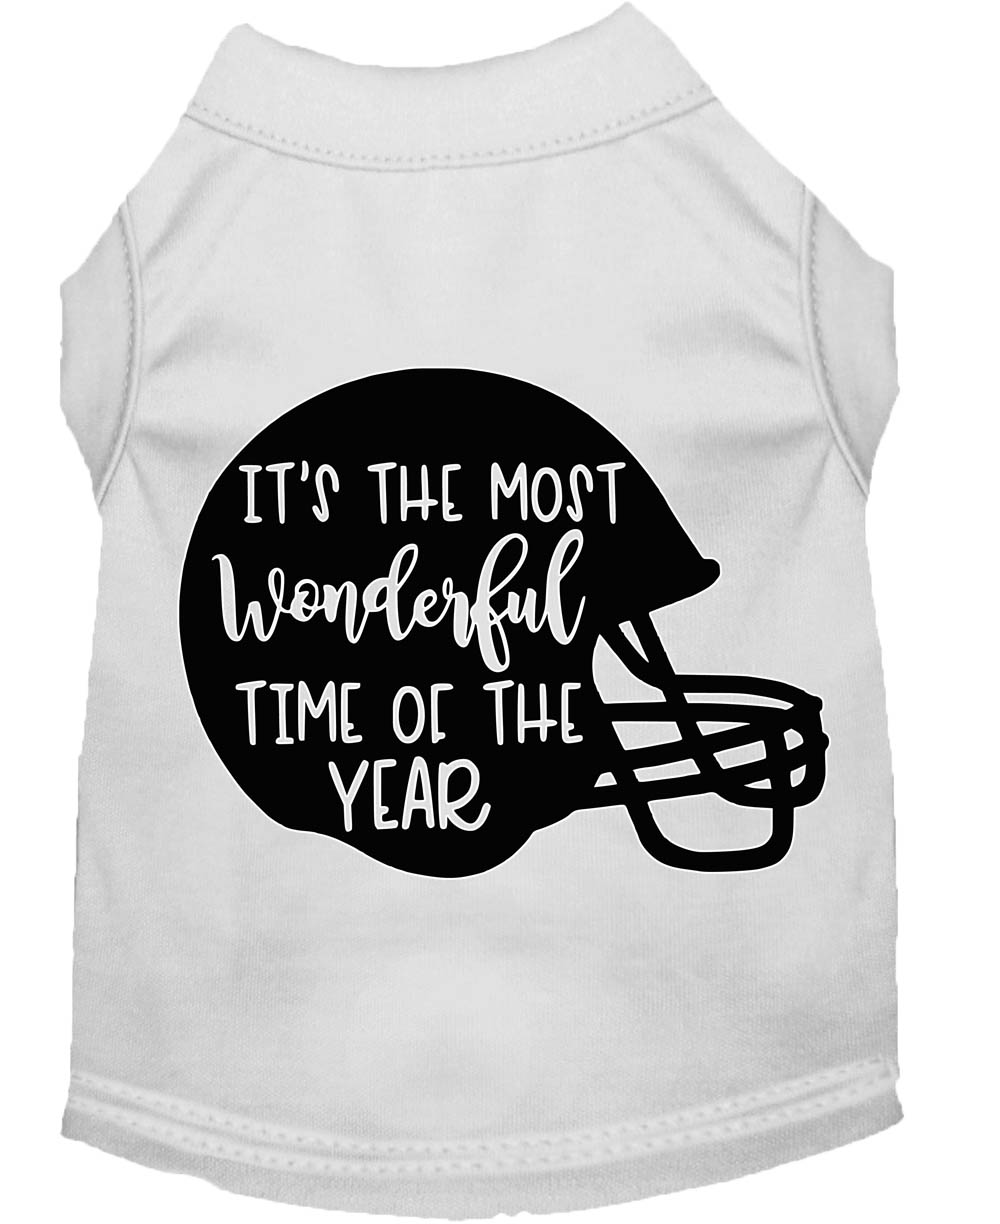 Most Wonderful Time of the Year (Football) Screen Print Dog Shirt White XS